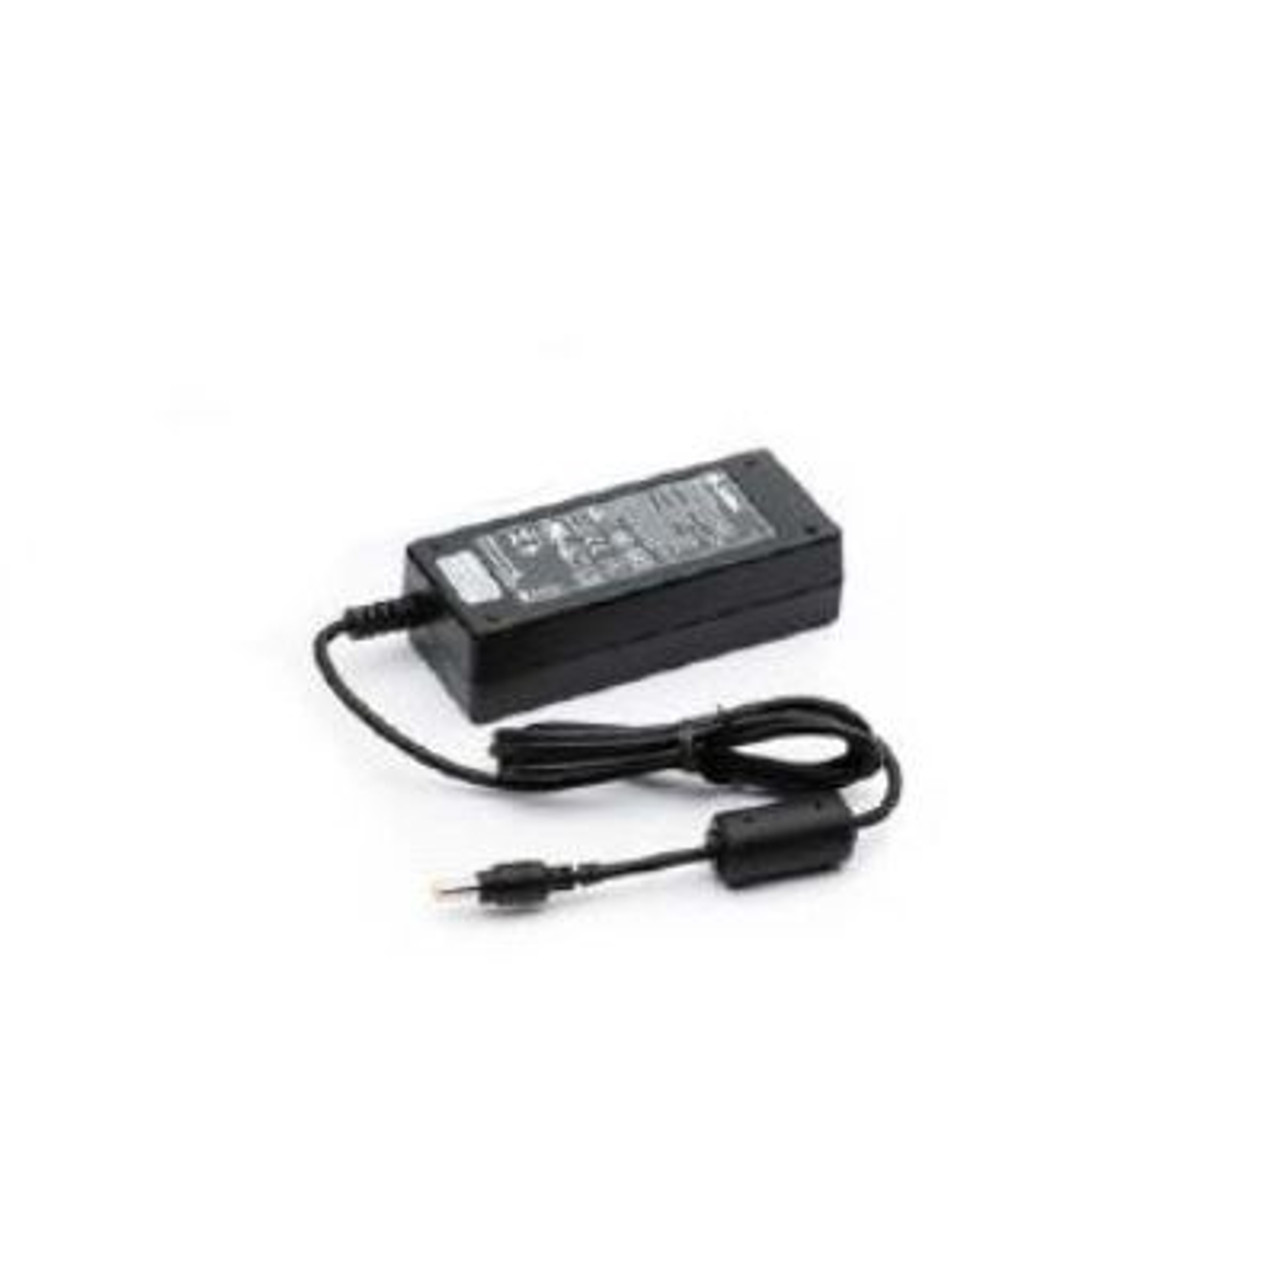 Charger for QLN and ZQ series P1031365-043